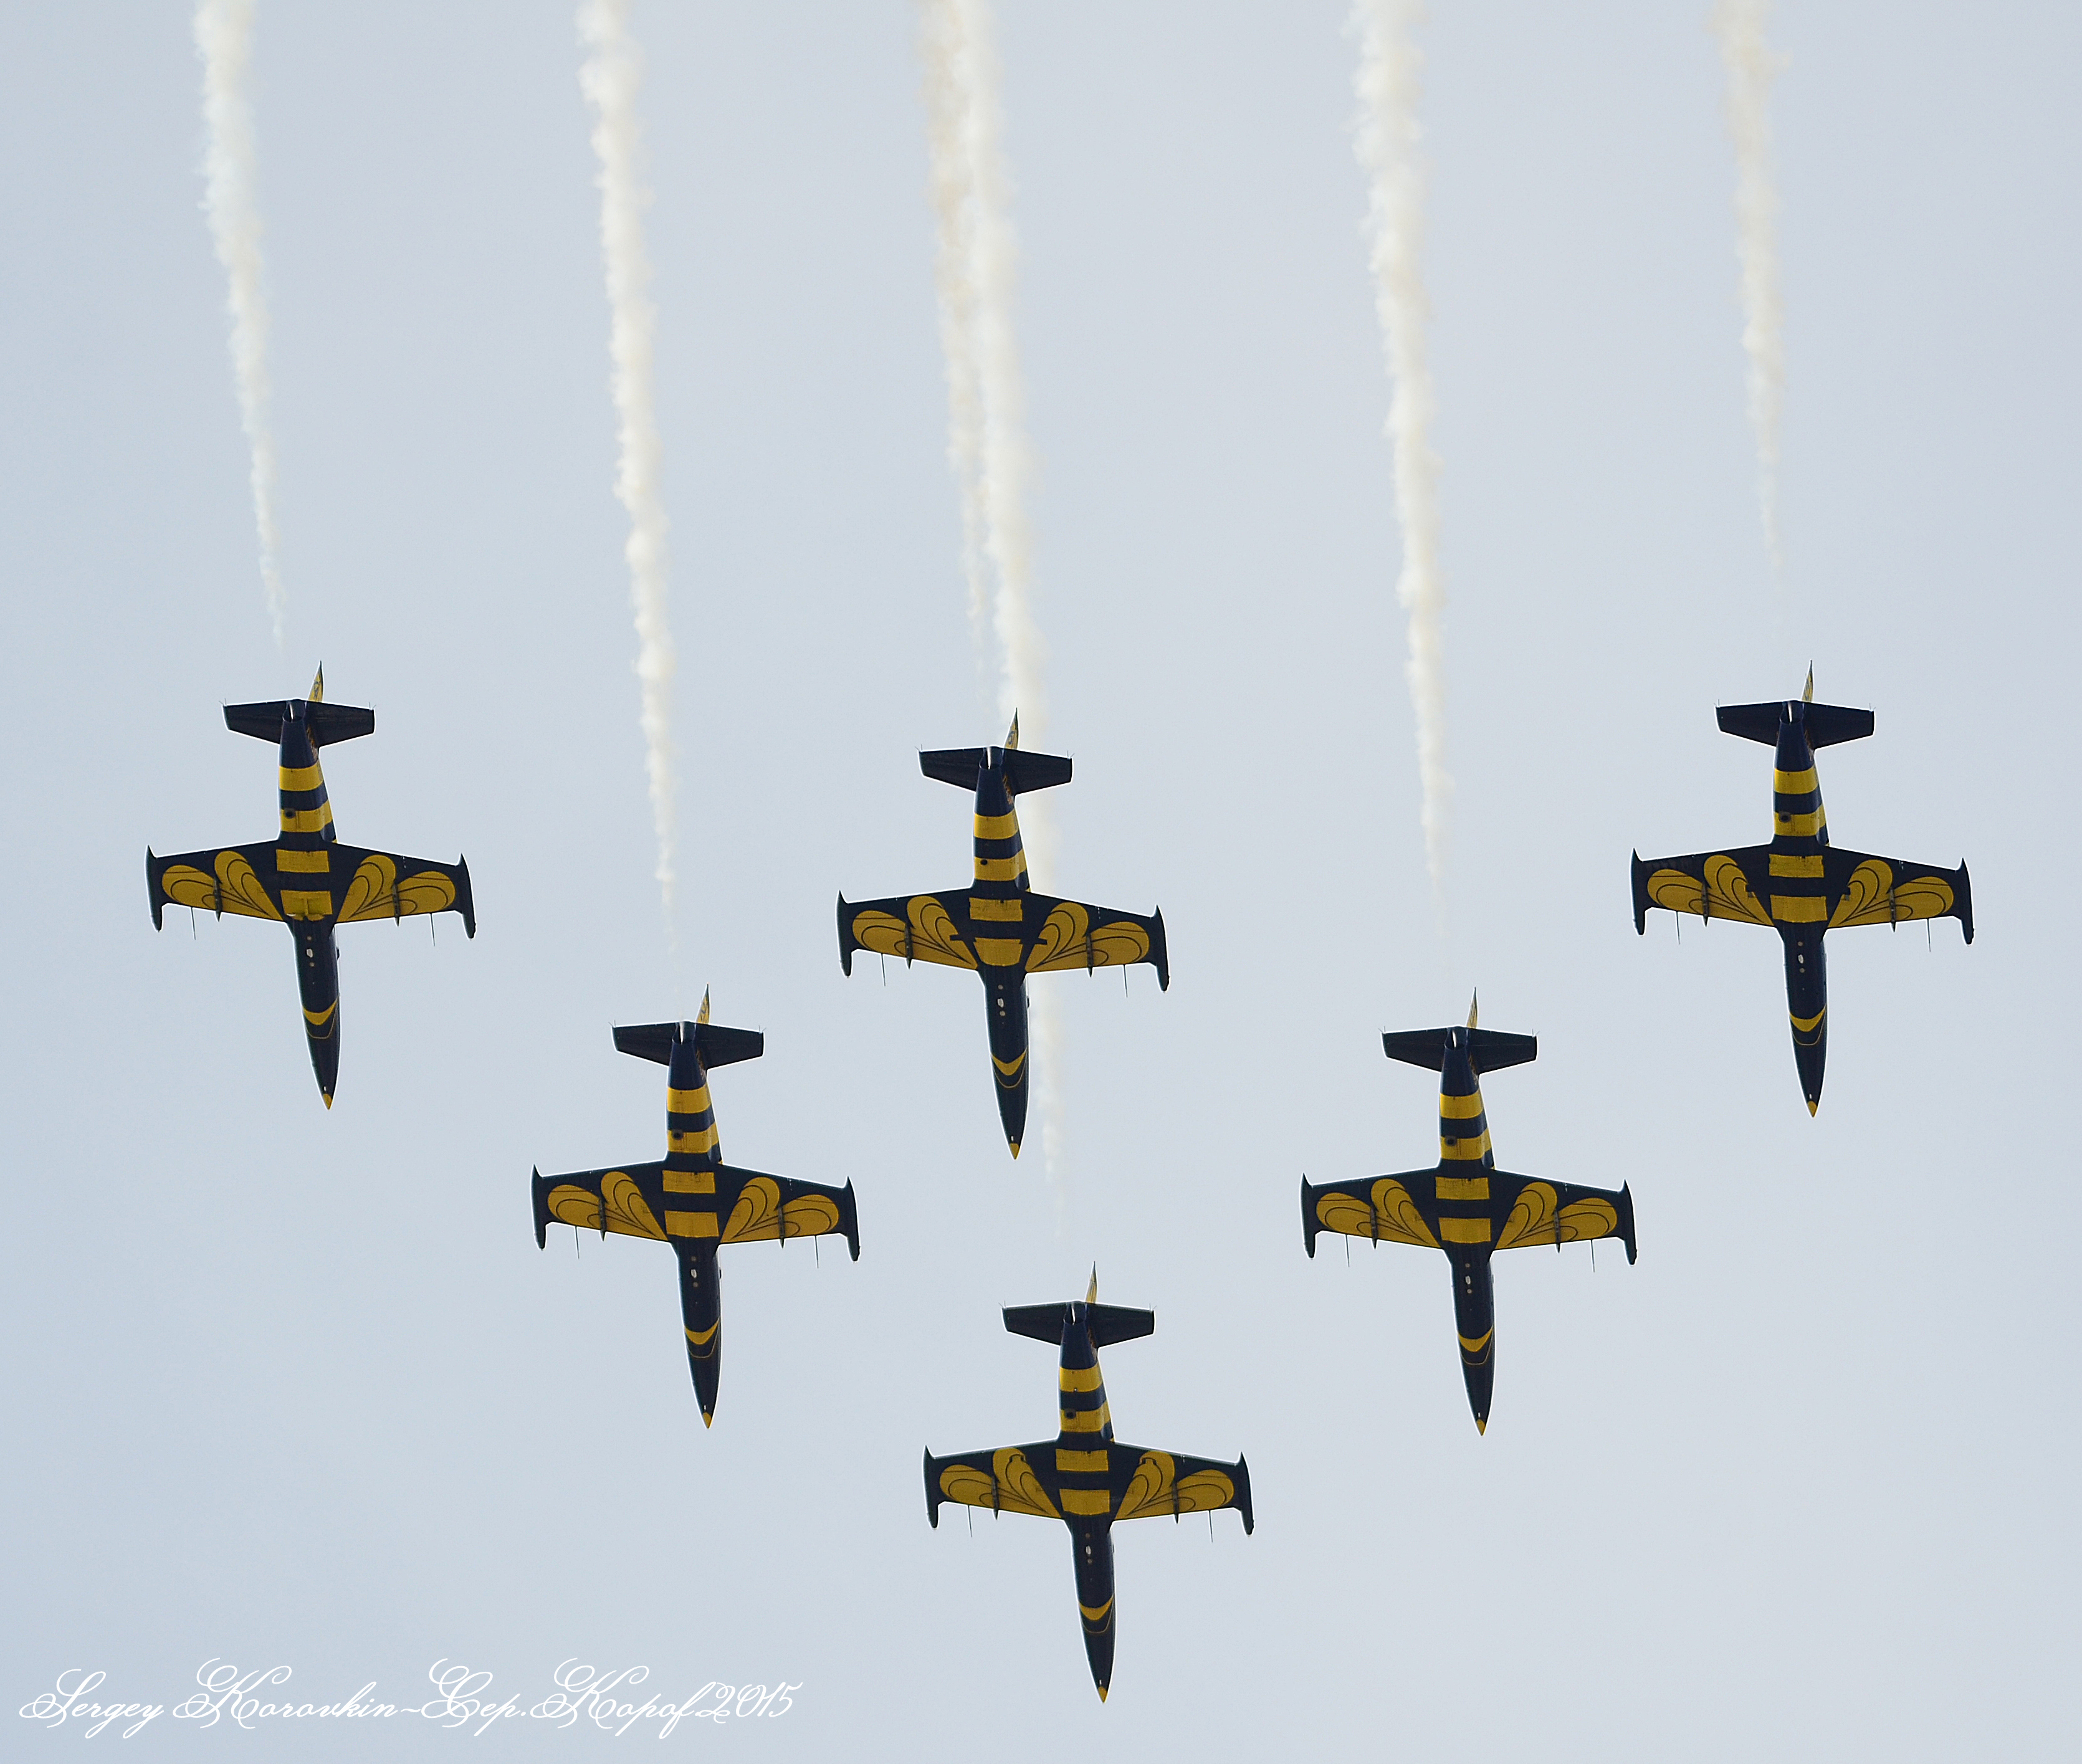 MAKS-2015 Air Show: Photos and Discussion - Page 3 0_17bdc0_169b3f78_orig